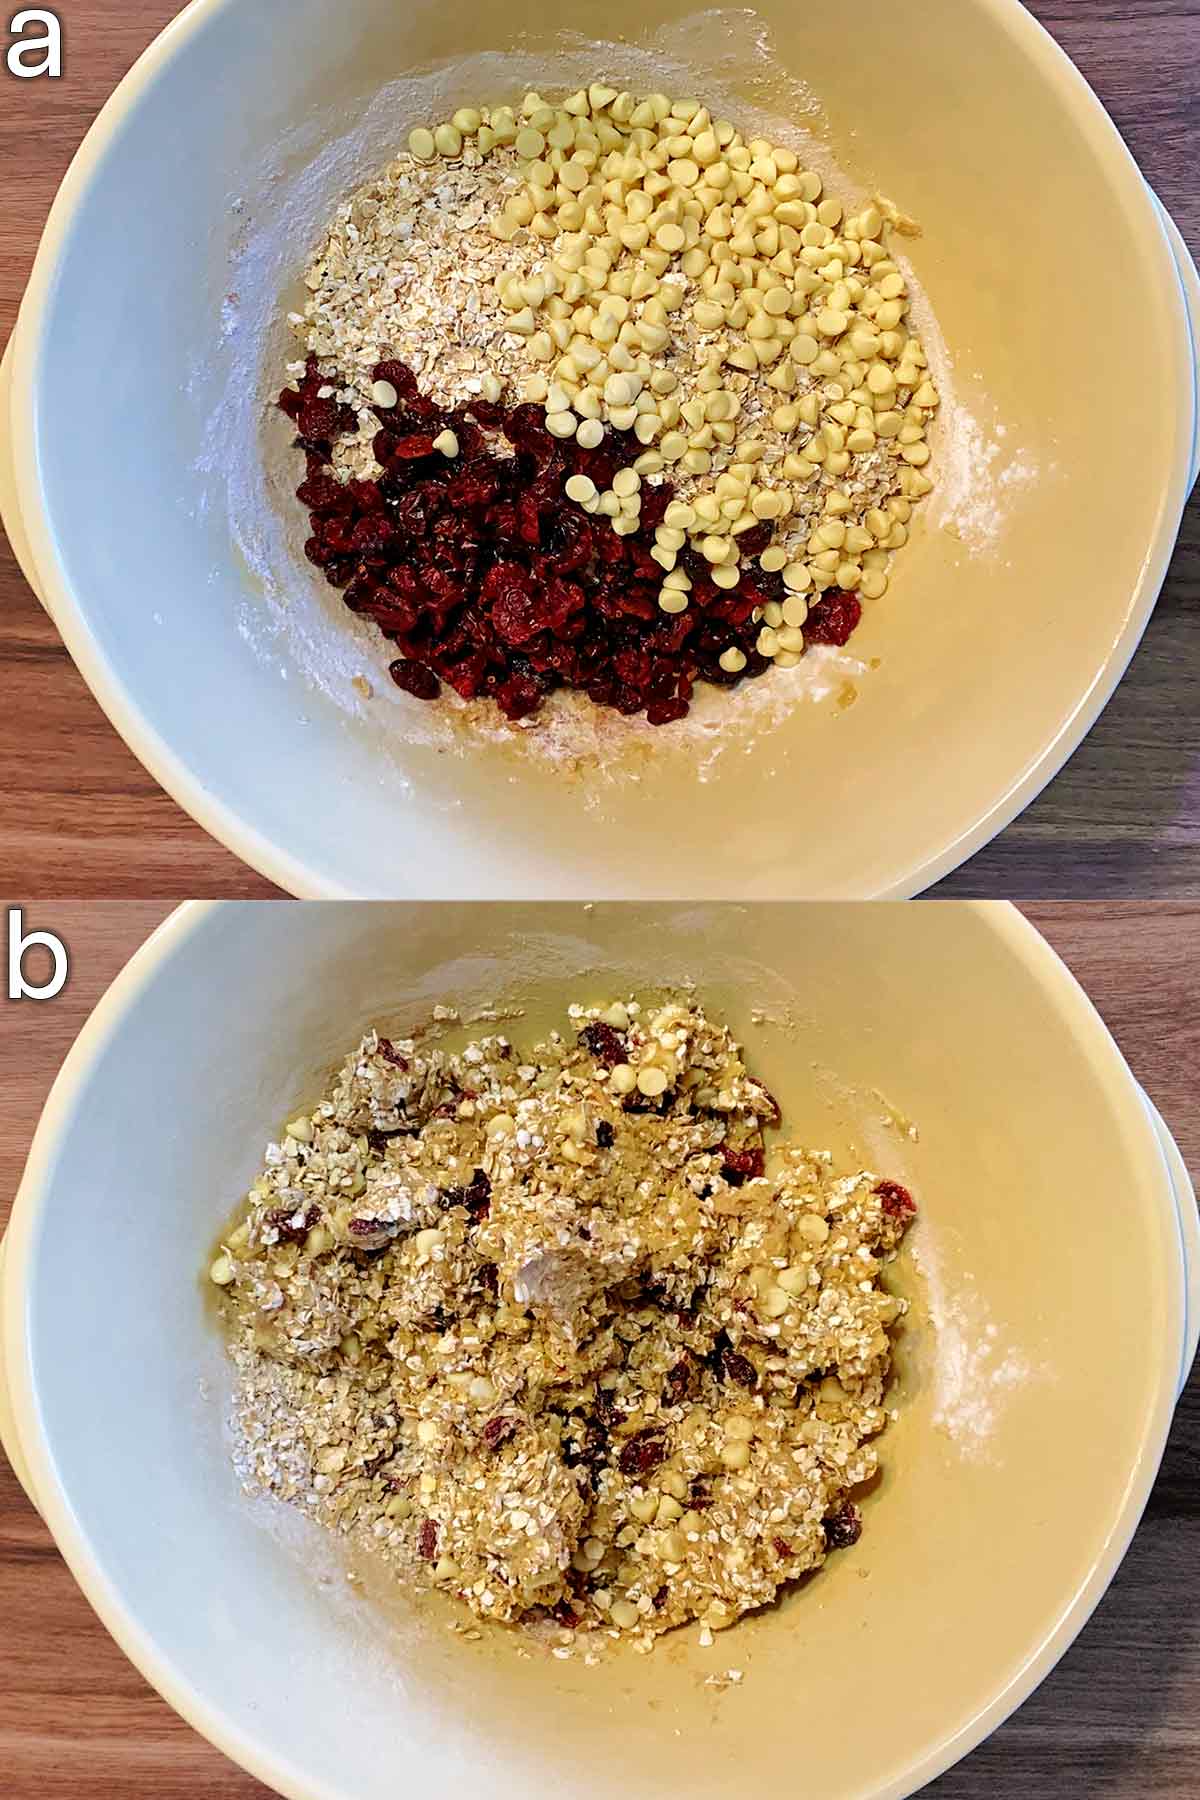 Oats, cranberries and white chocolate chips added to the bowl and mixed in.